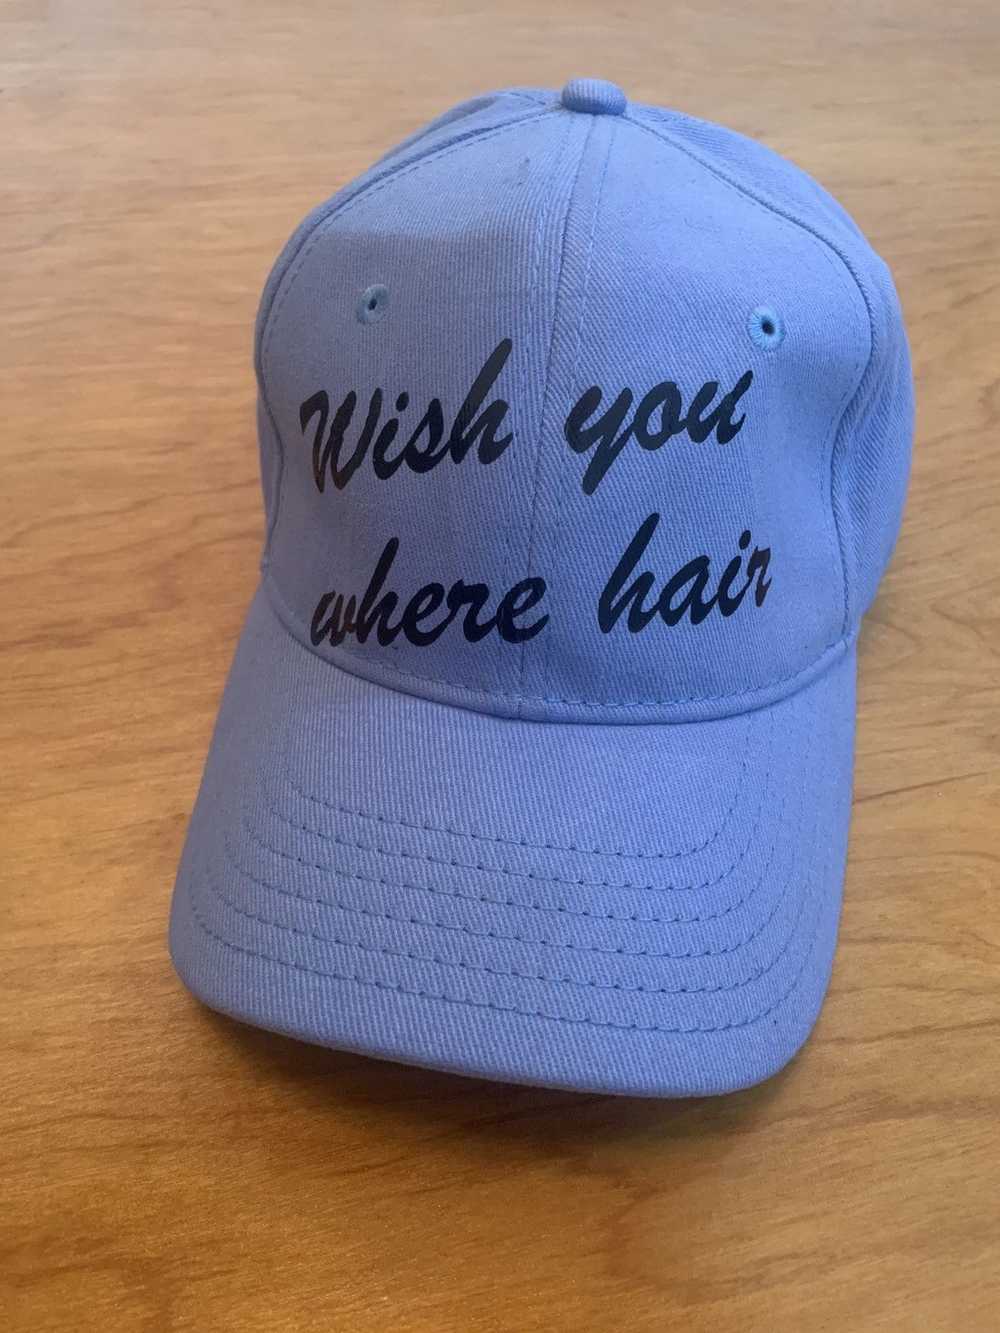 Dad Hat × Other × Vintage Wish You Where Hair Fun… - image 1